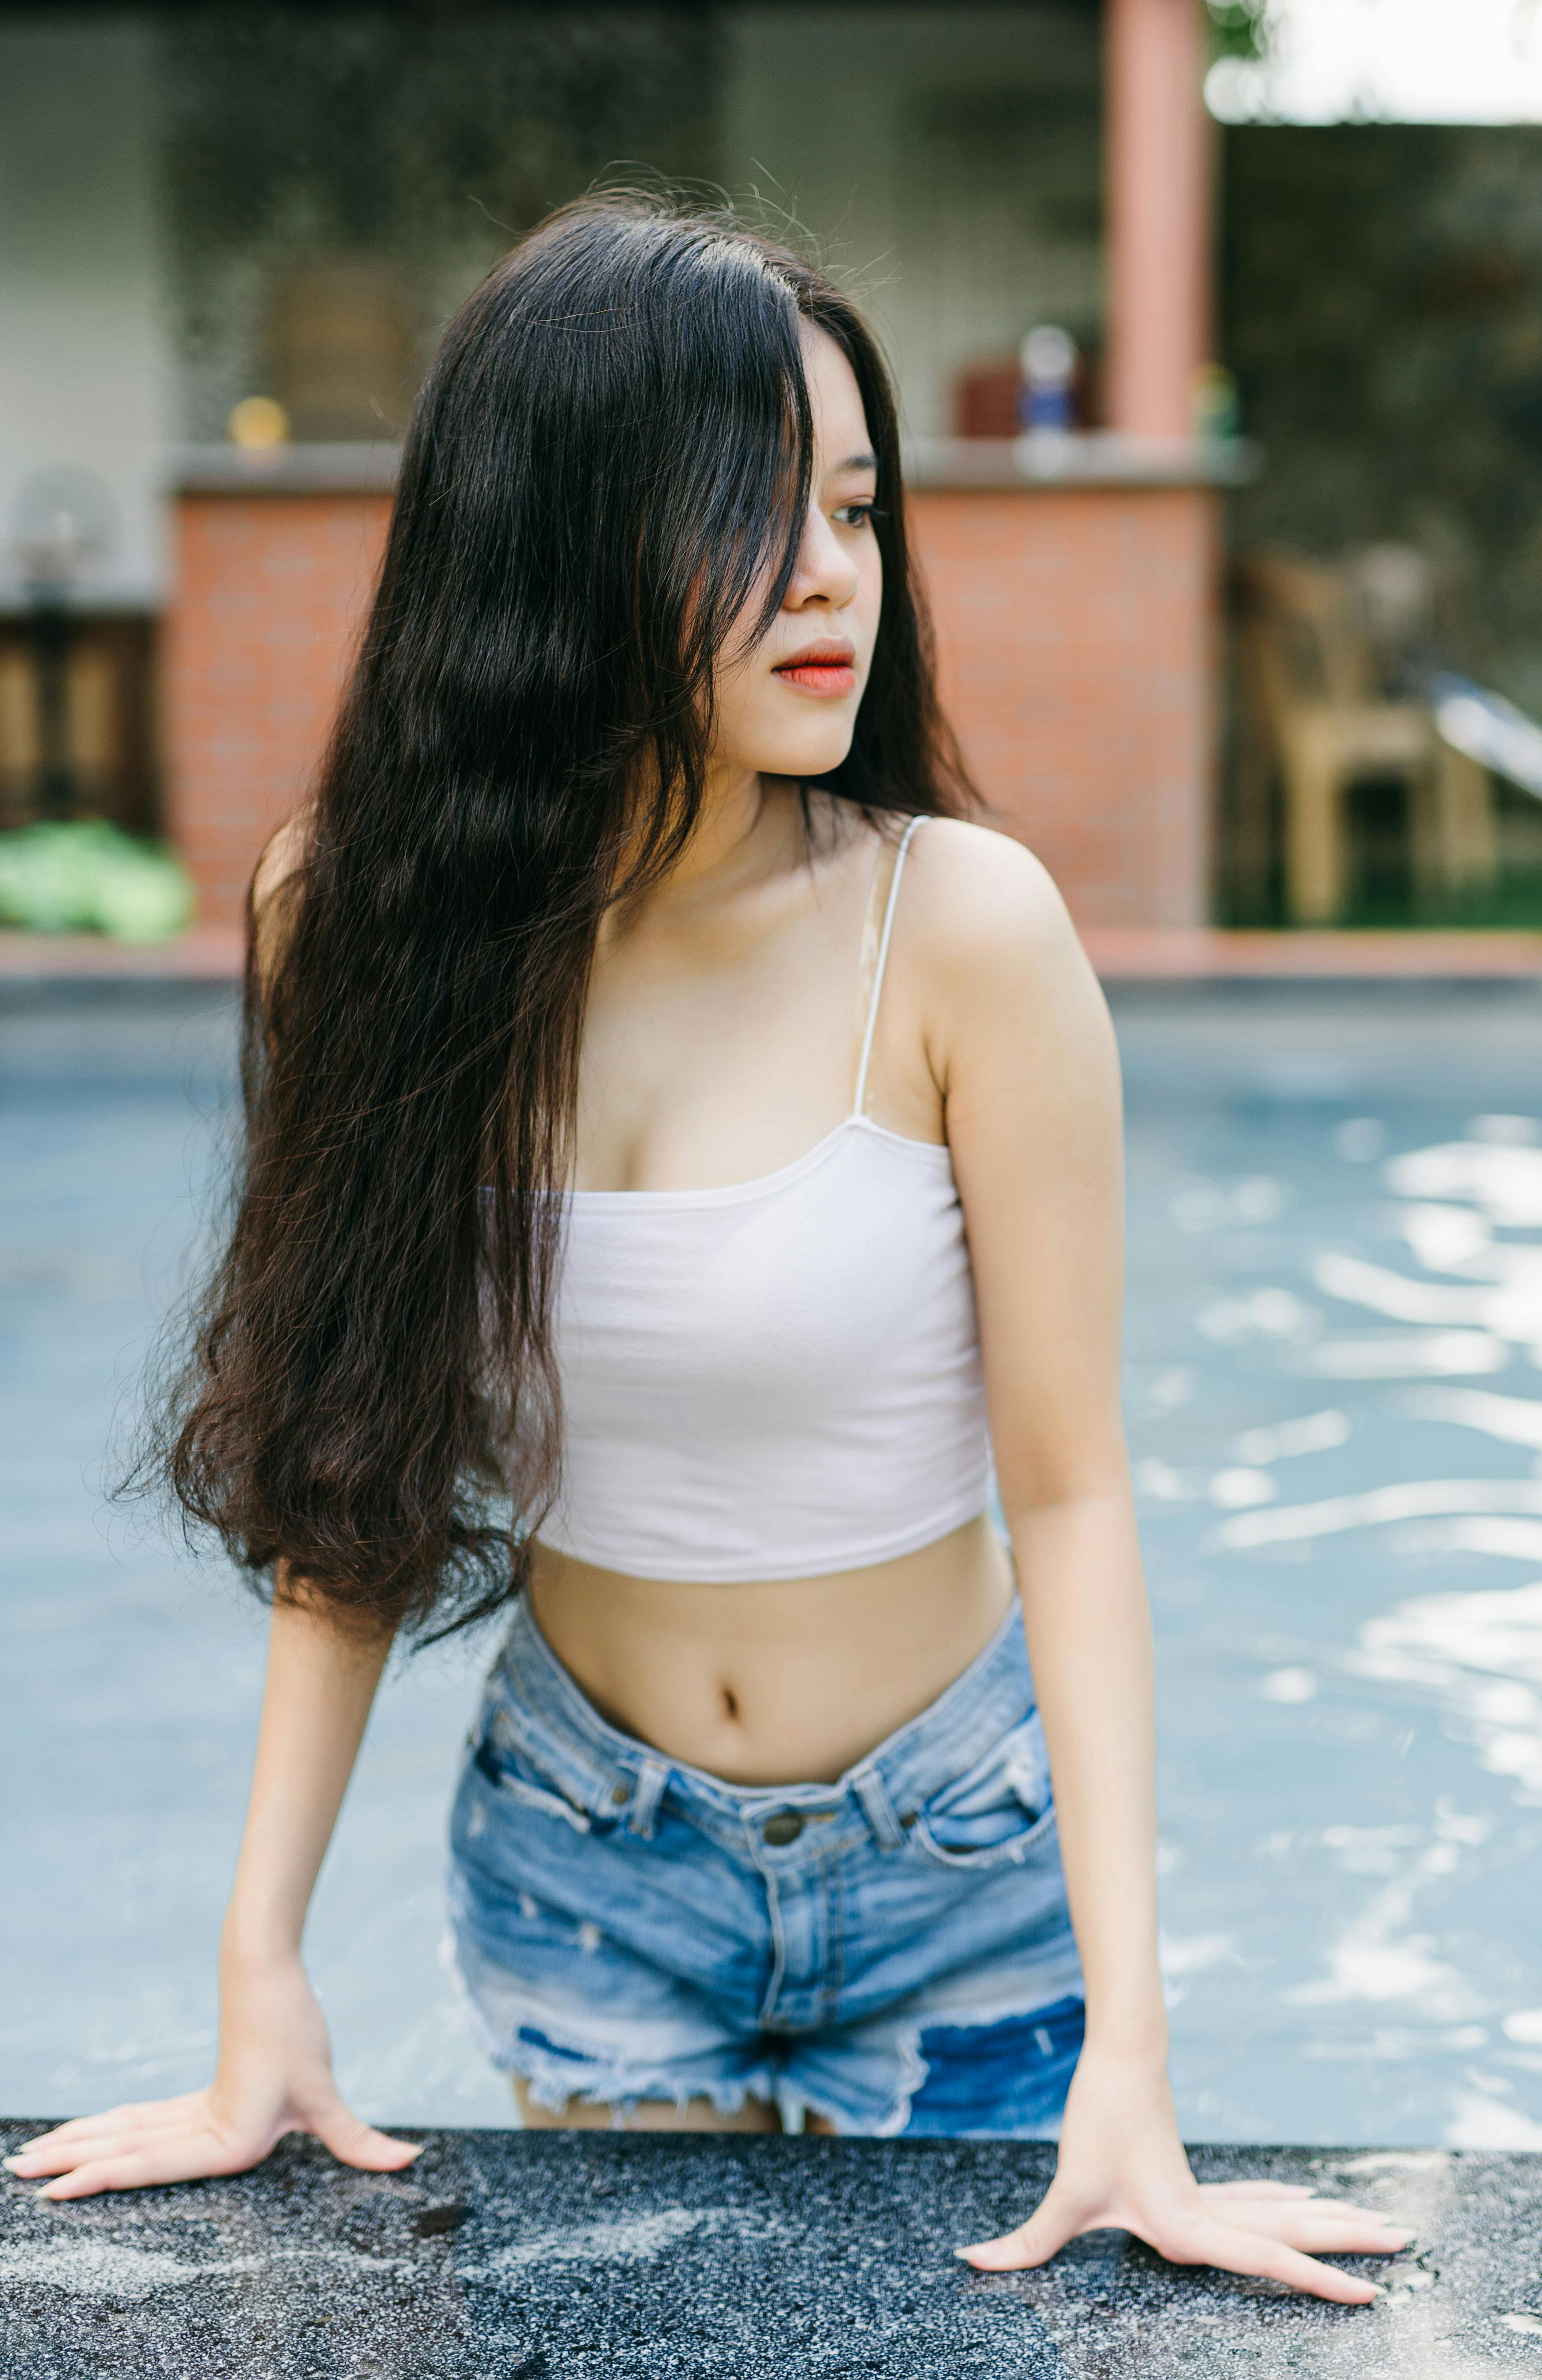 Charming Asian woman in pool on terrace · Free Stock Photo